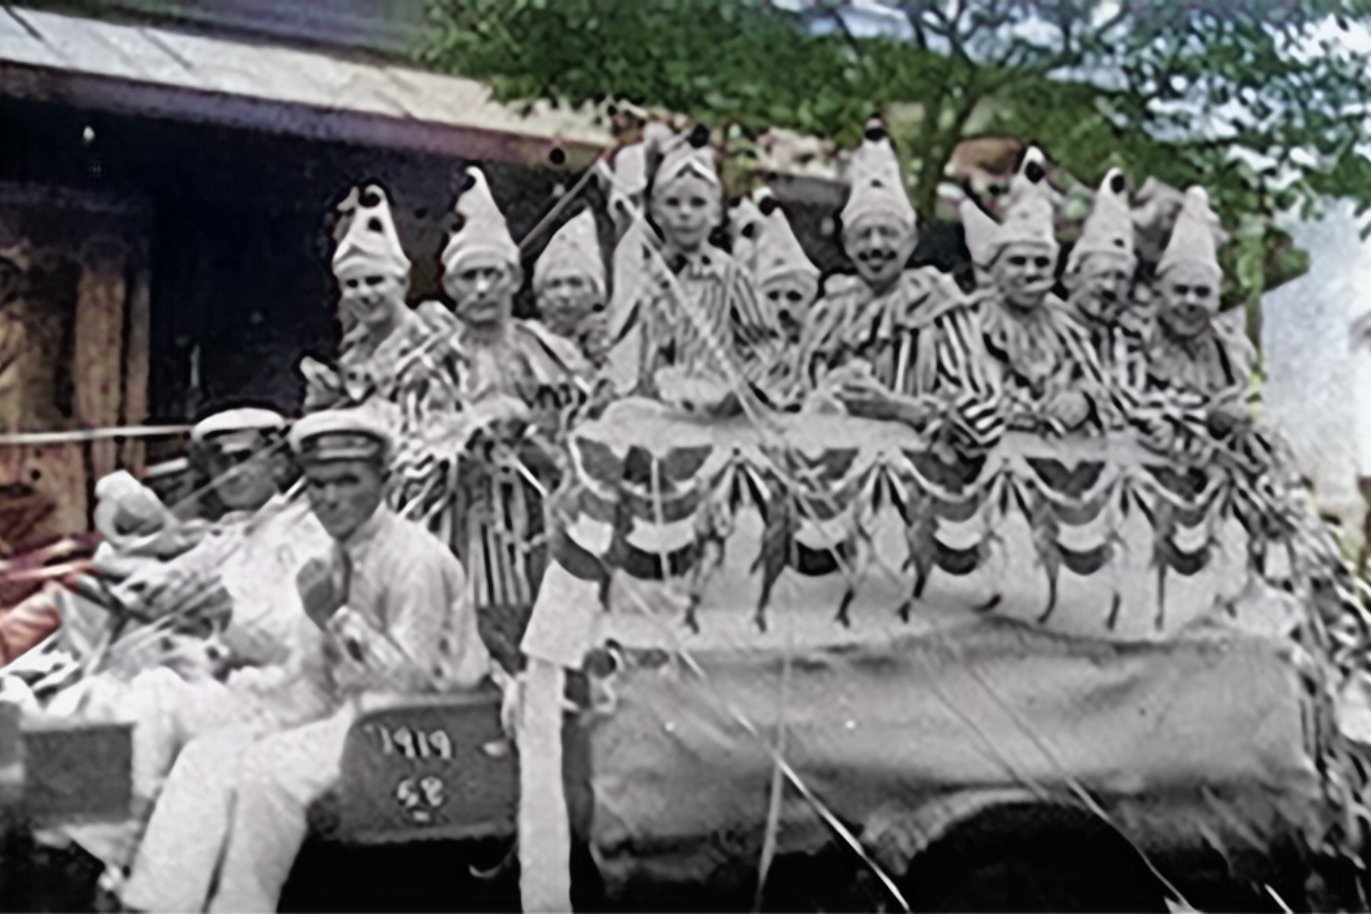 Corso carnavalesco with cars populated by revelers in costumes, decorated with streamers. Colorized reproduction.